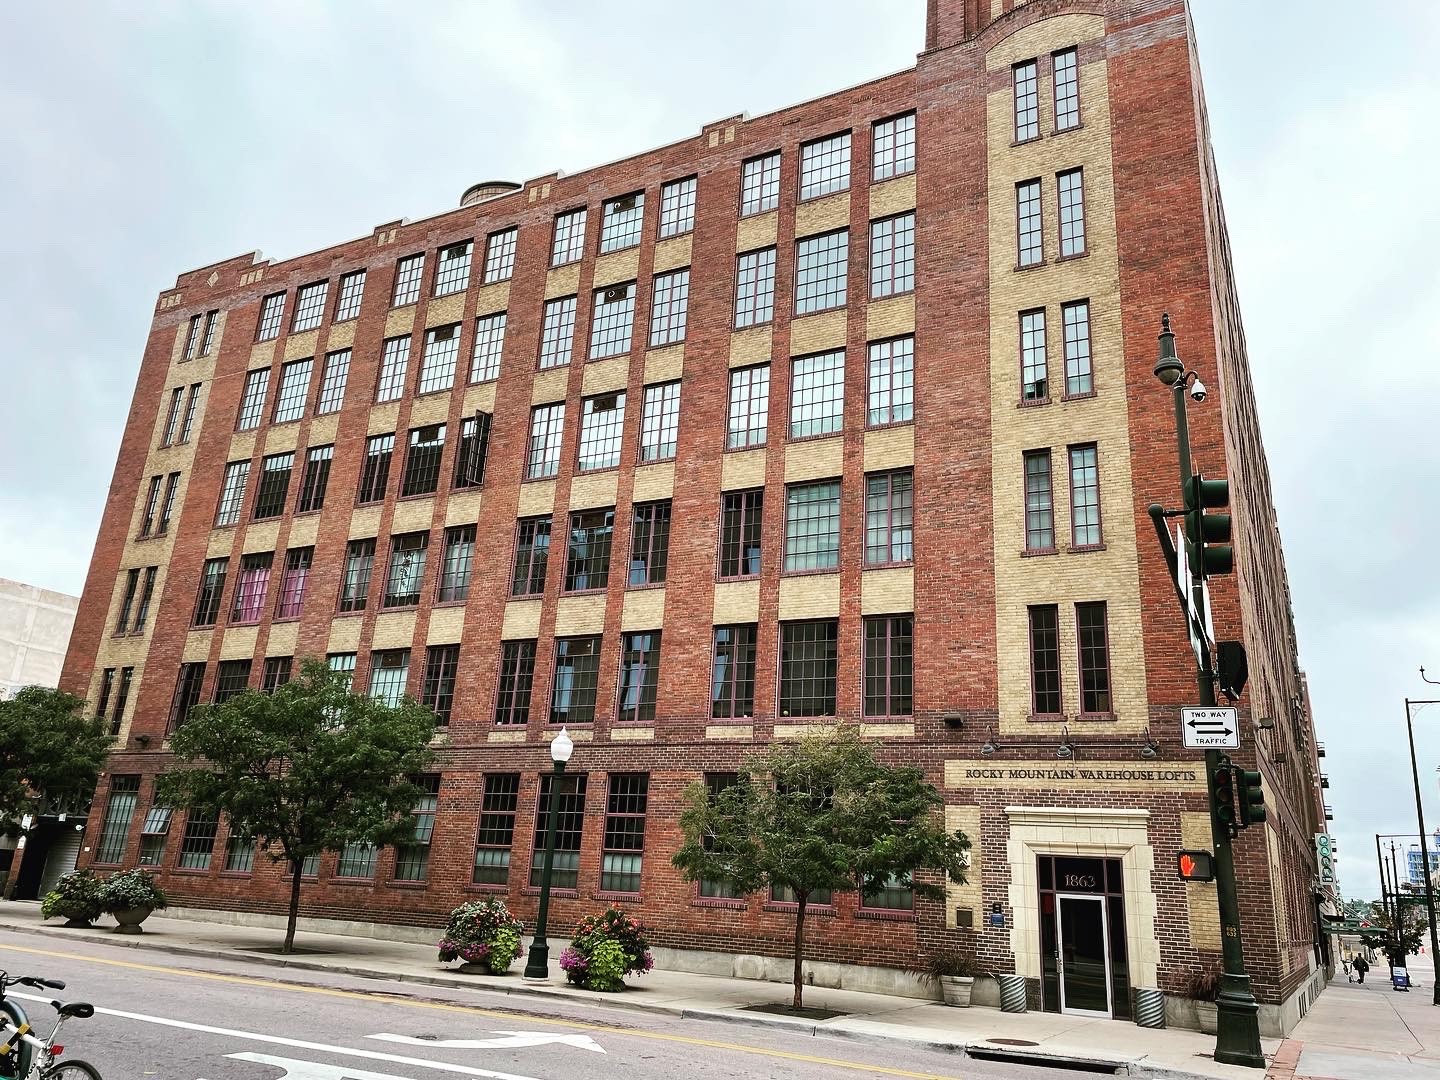 streetscape photo of a brick building with large windows